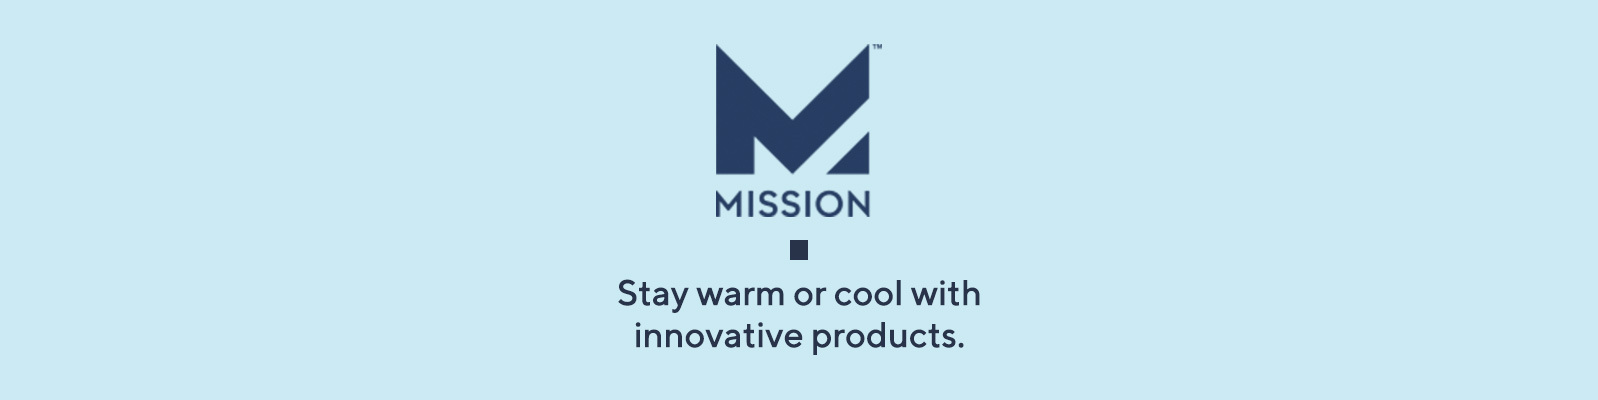 MISSION Stay warm or cool with innovative products.